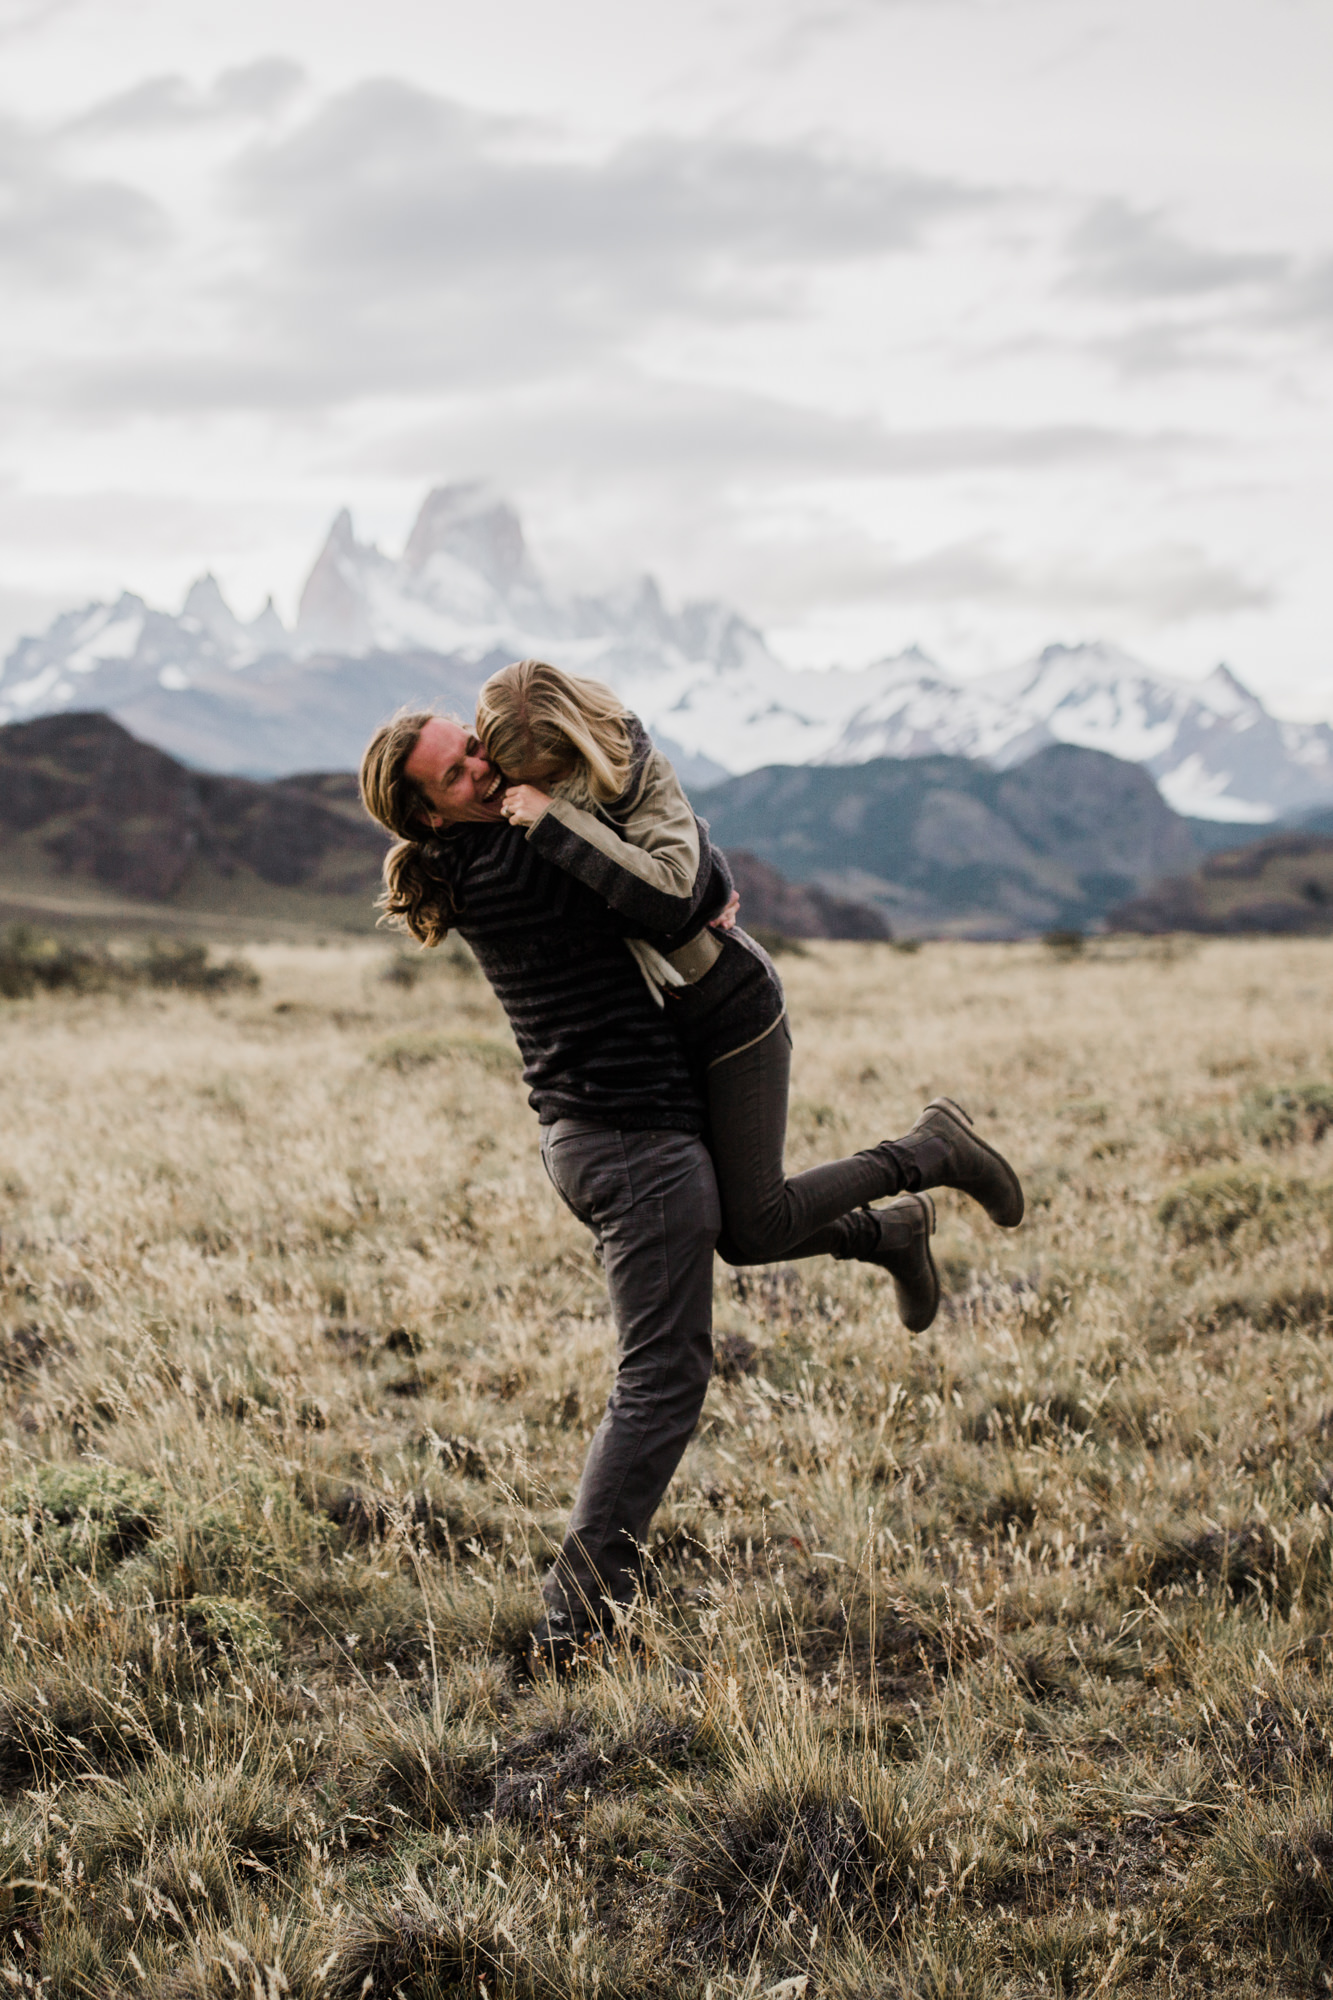 patagonia would be an awesome place for an elopement!